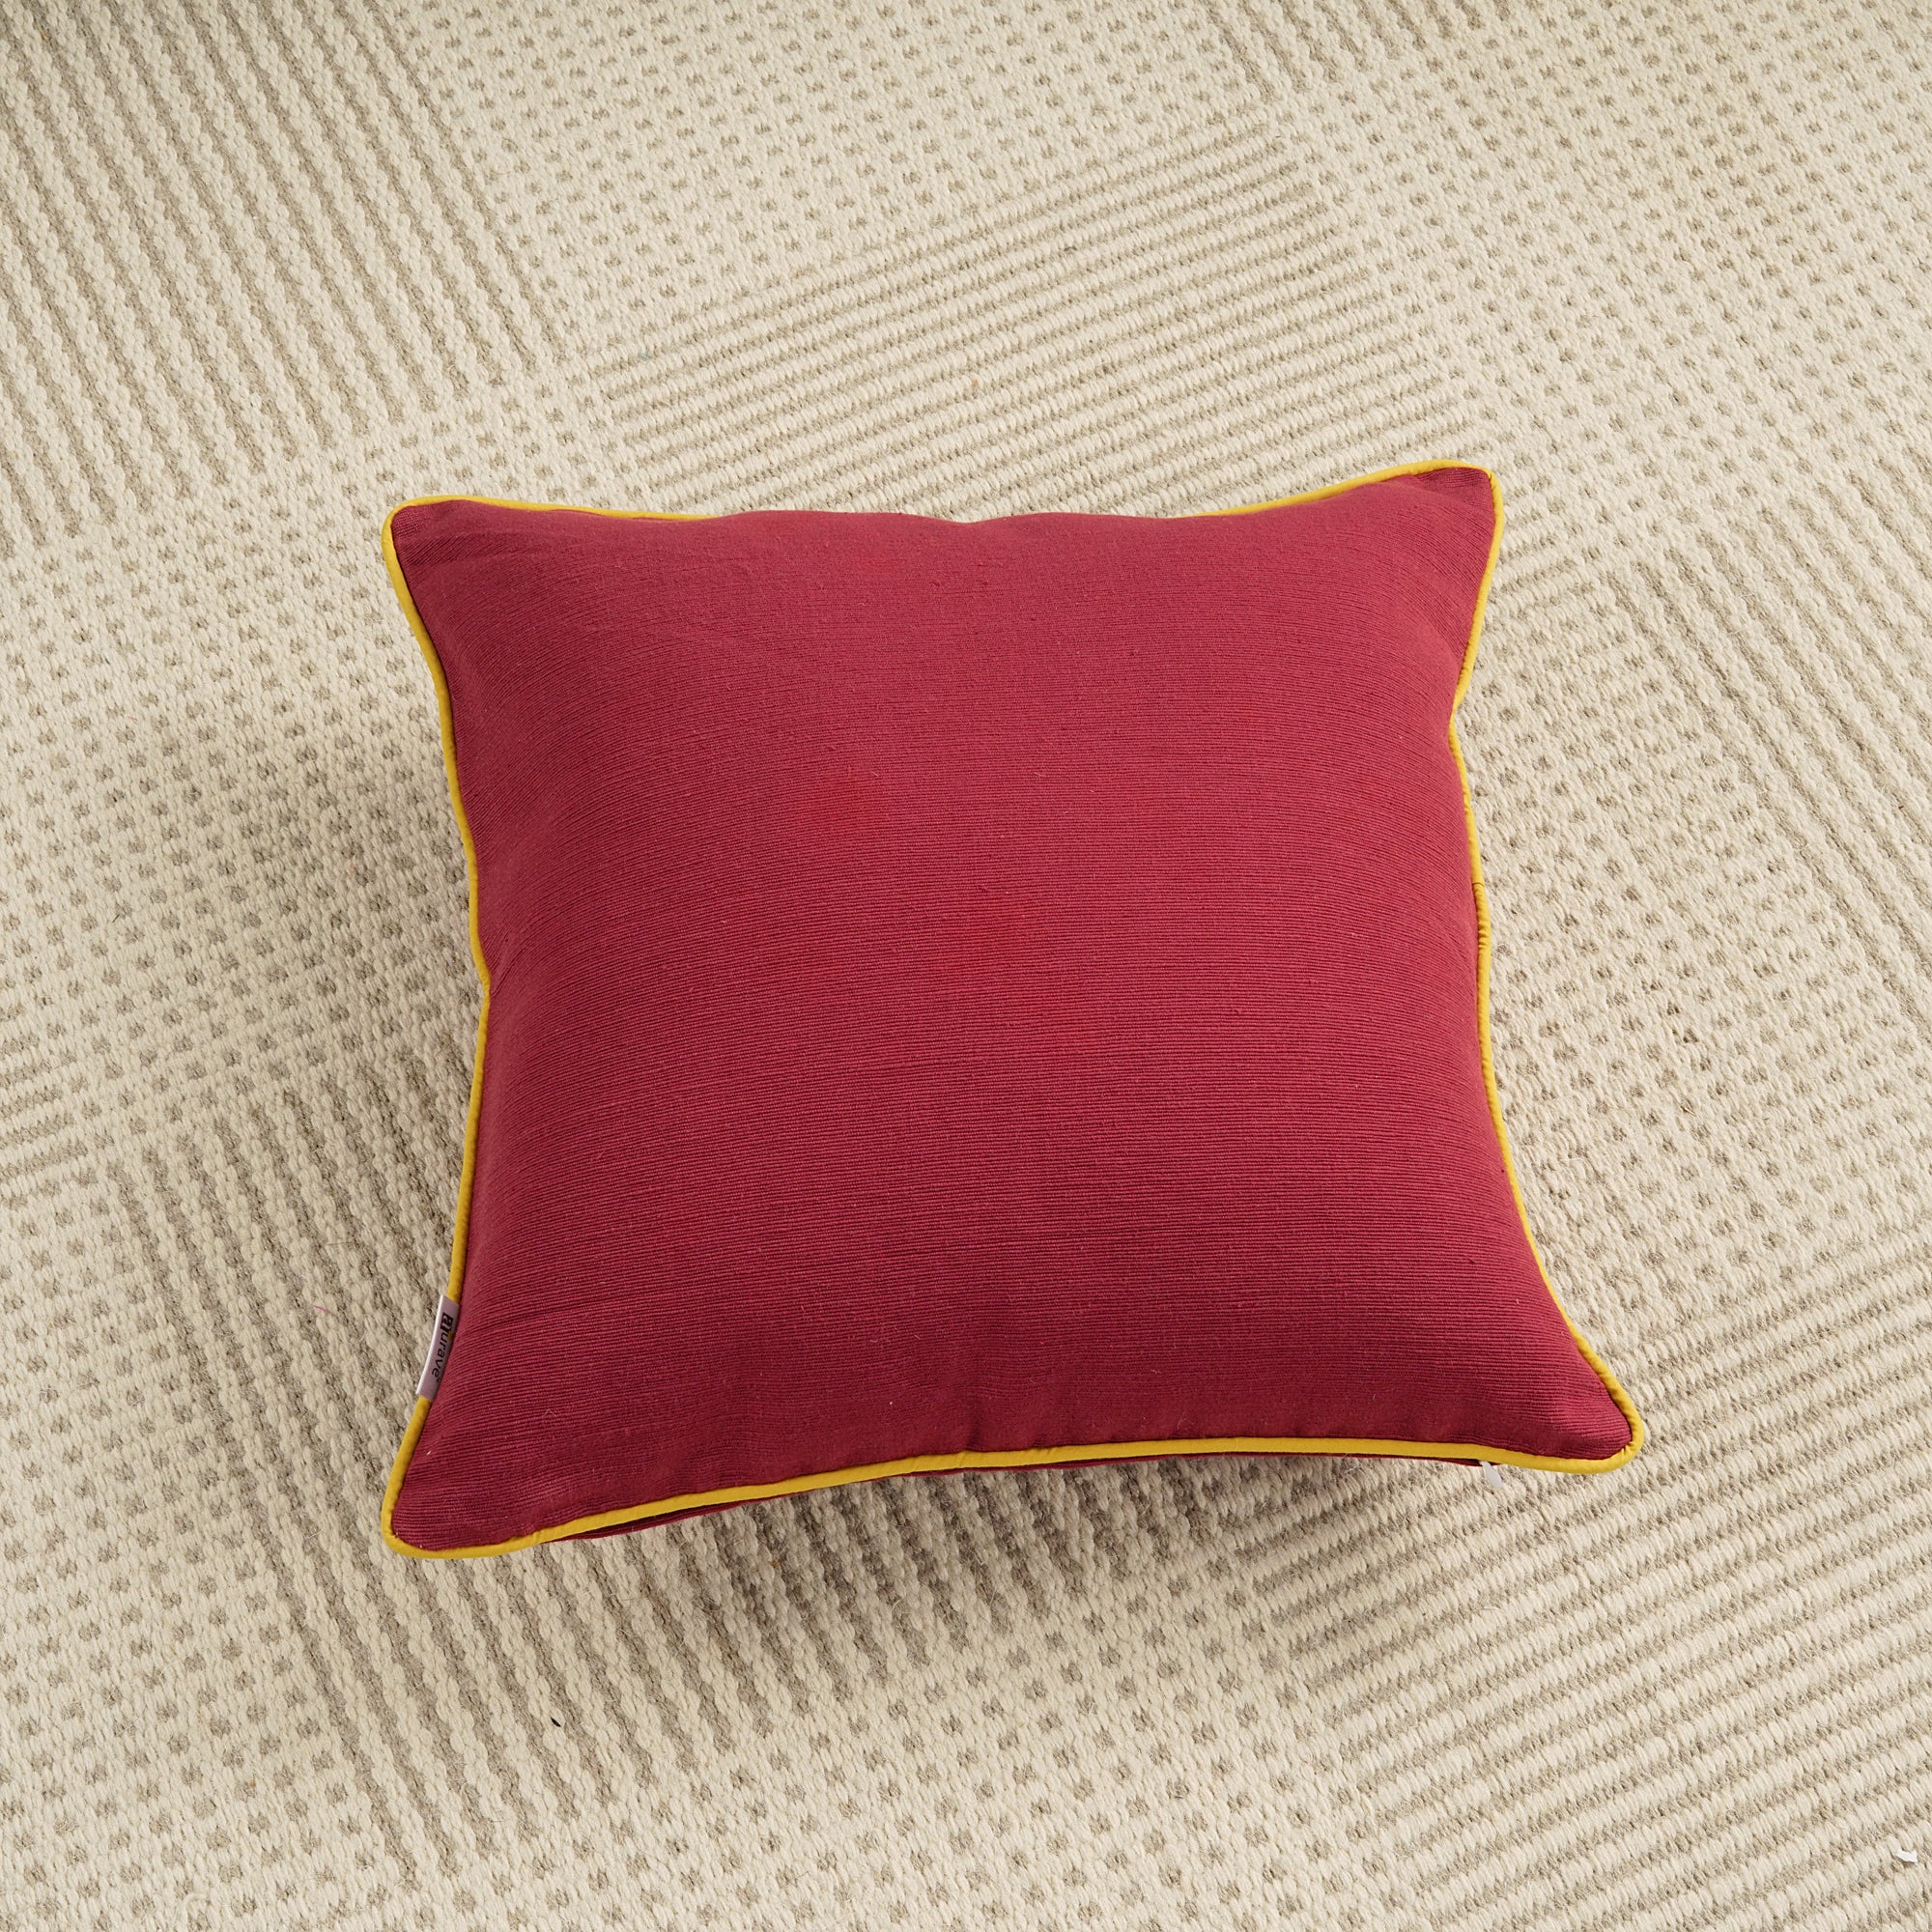 Soft Woven Corded Stripe Cotton Cushion Cover Set in Red online (1Pc)